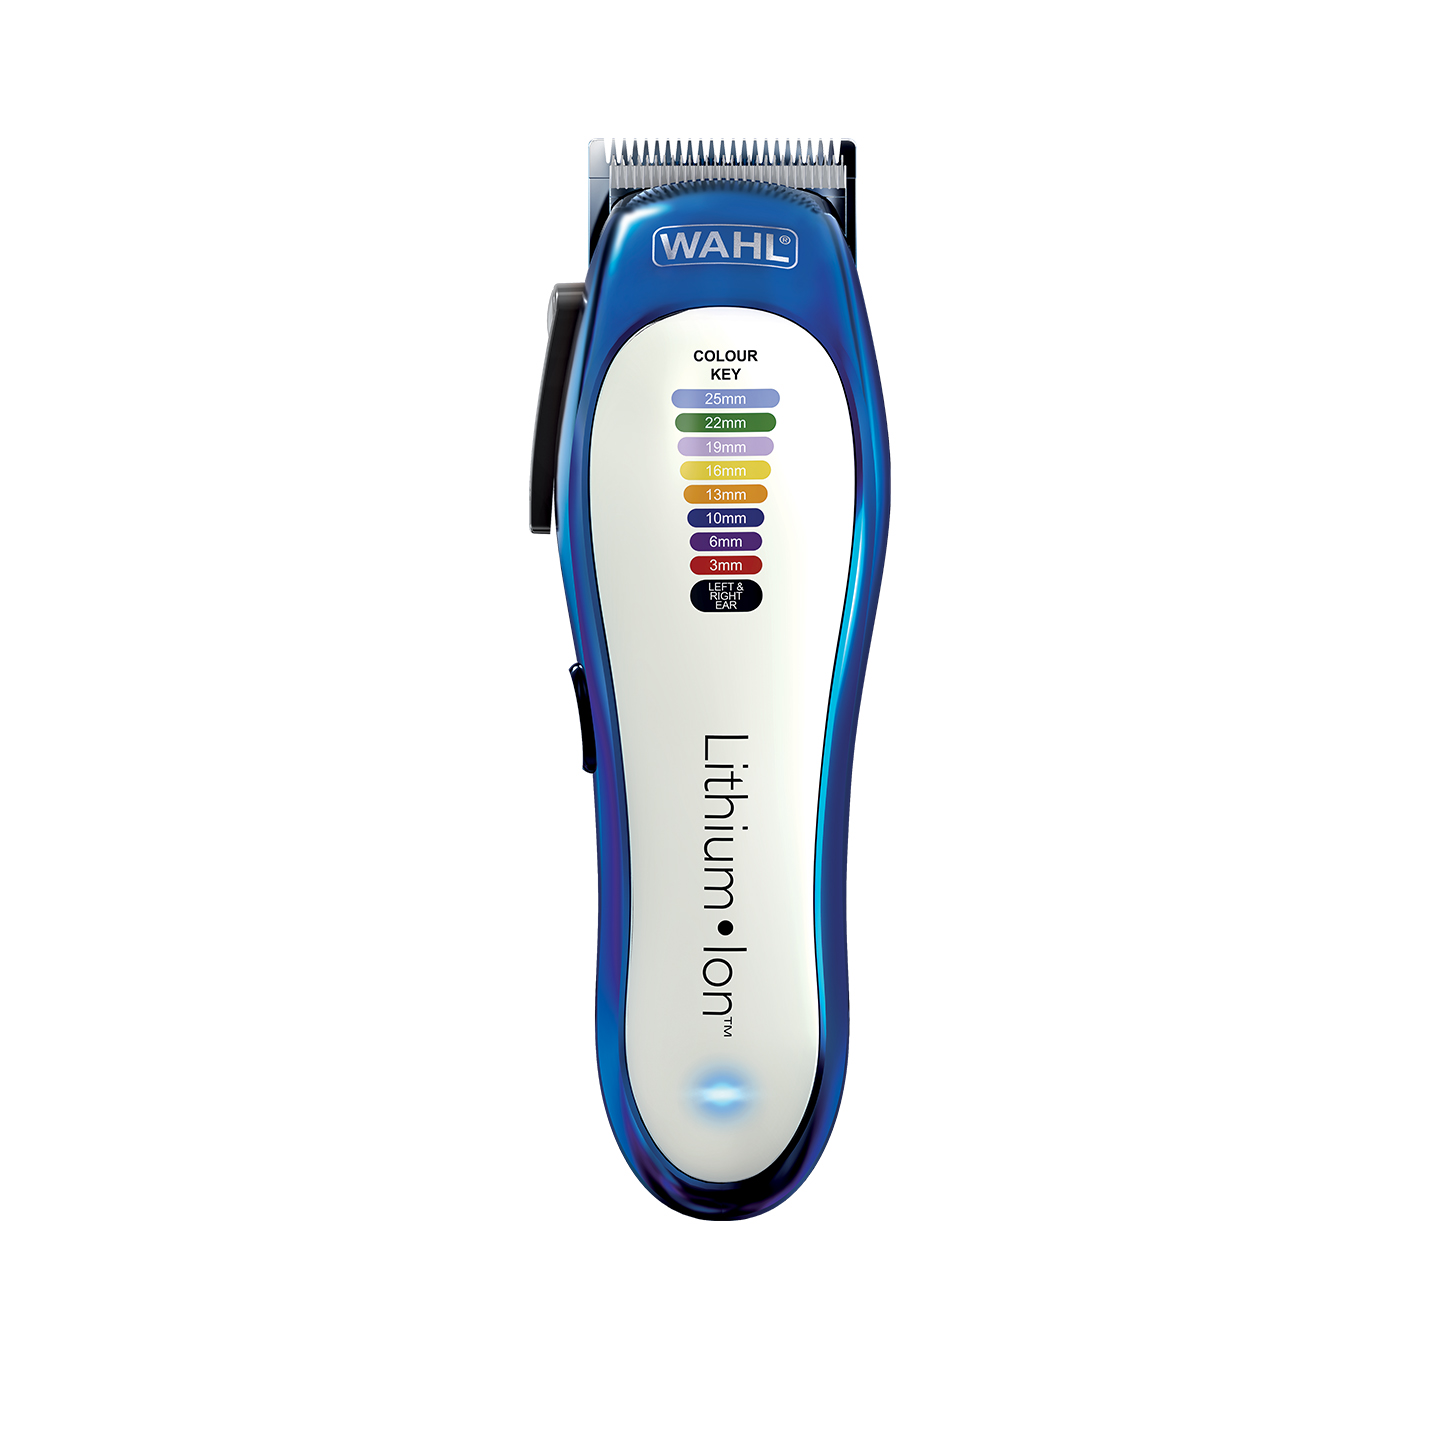 wahl color pro cordless not cutting